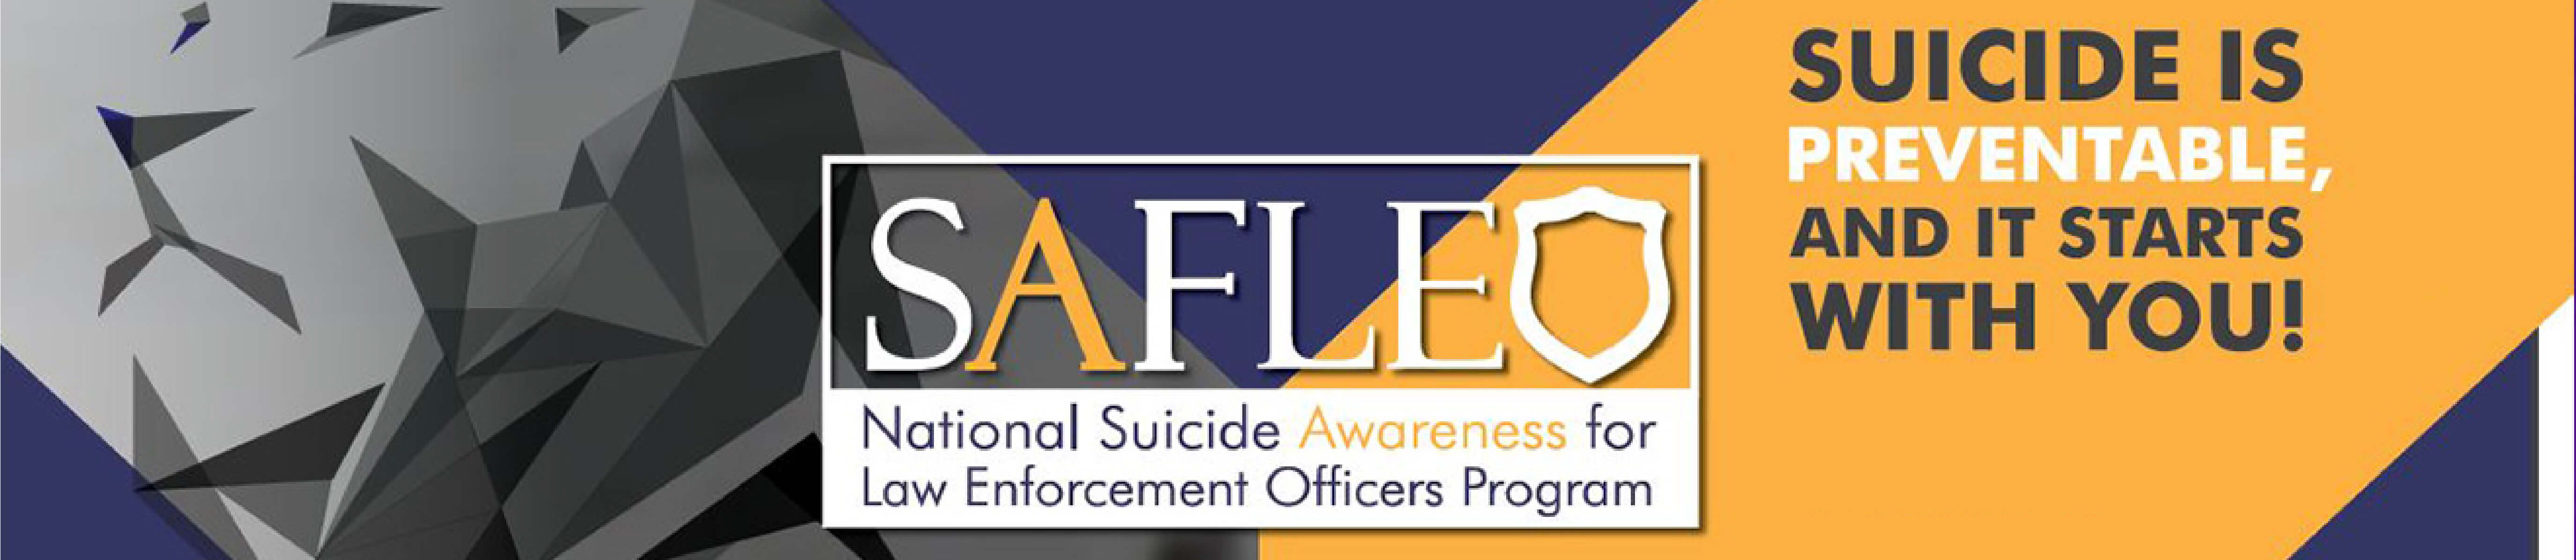 National Suicide Awareness for Law Enforcement Officers:  Suicide Is Preventable and It Starts with You!